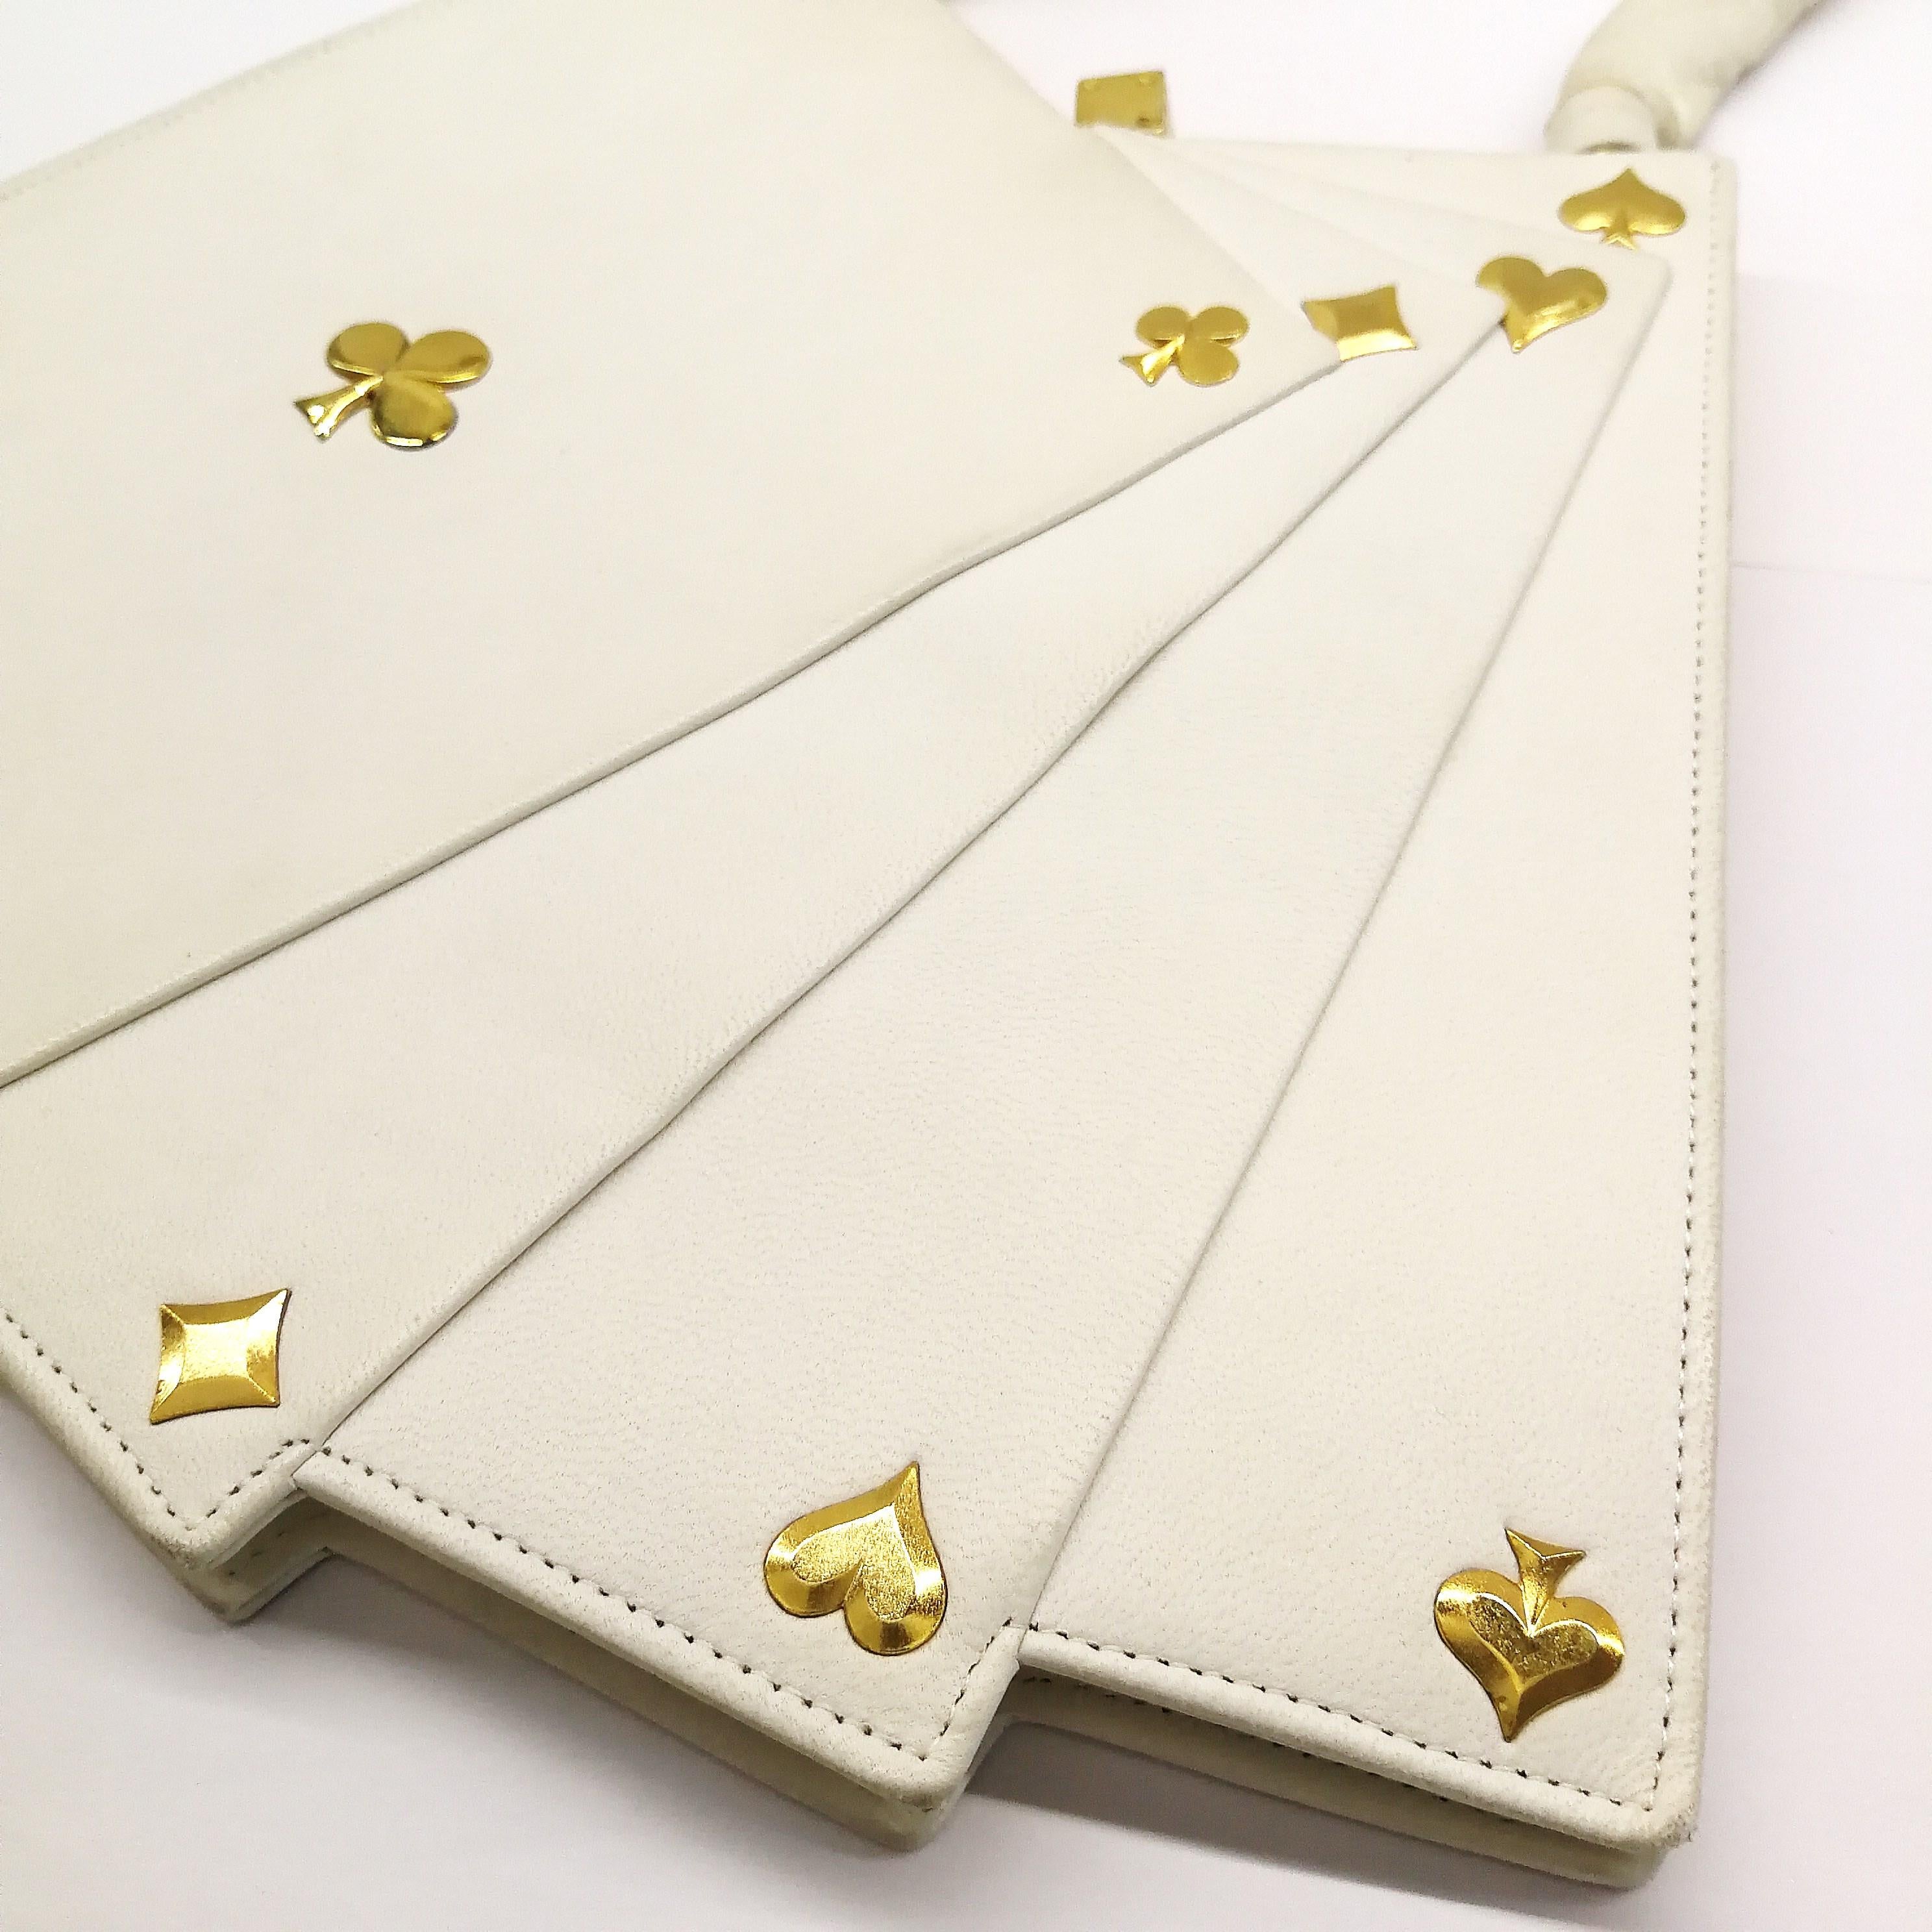 White Exquisite Anne-Marie of Paris white leather and gilt 'Hand of Cards' handbag.